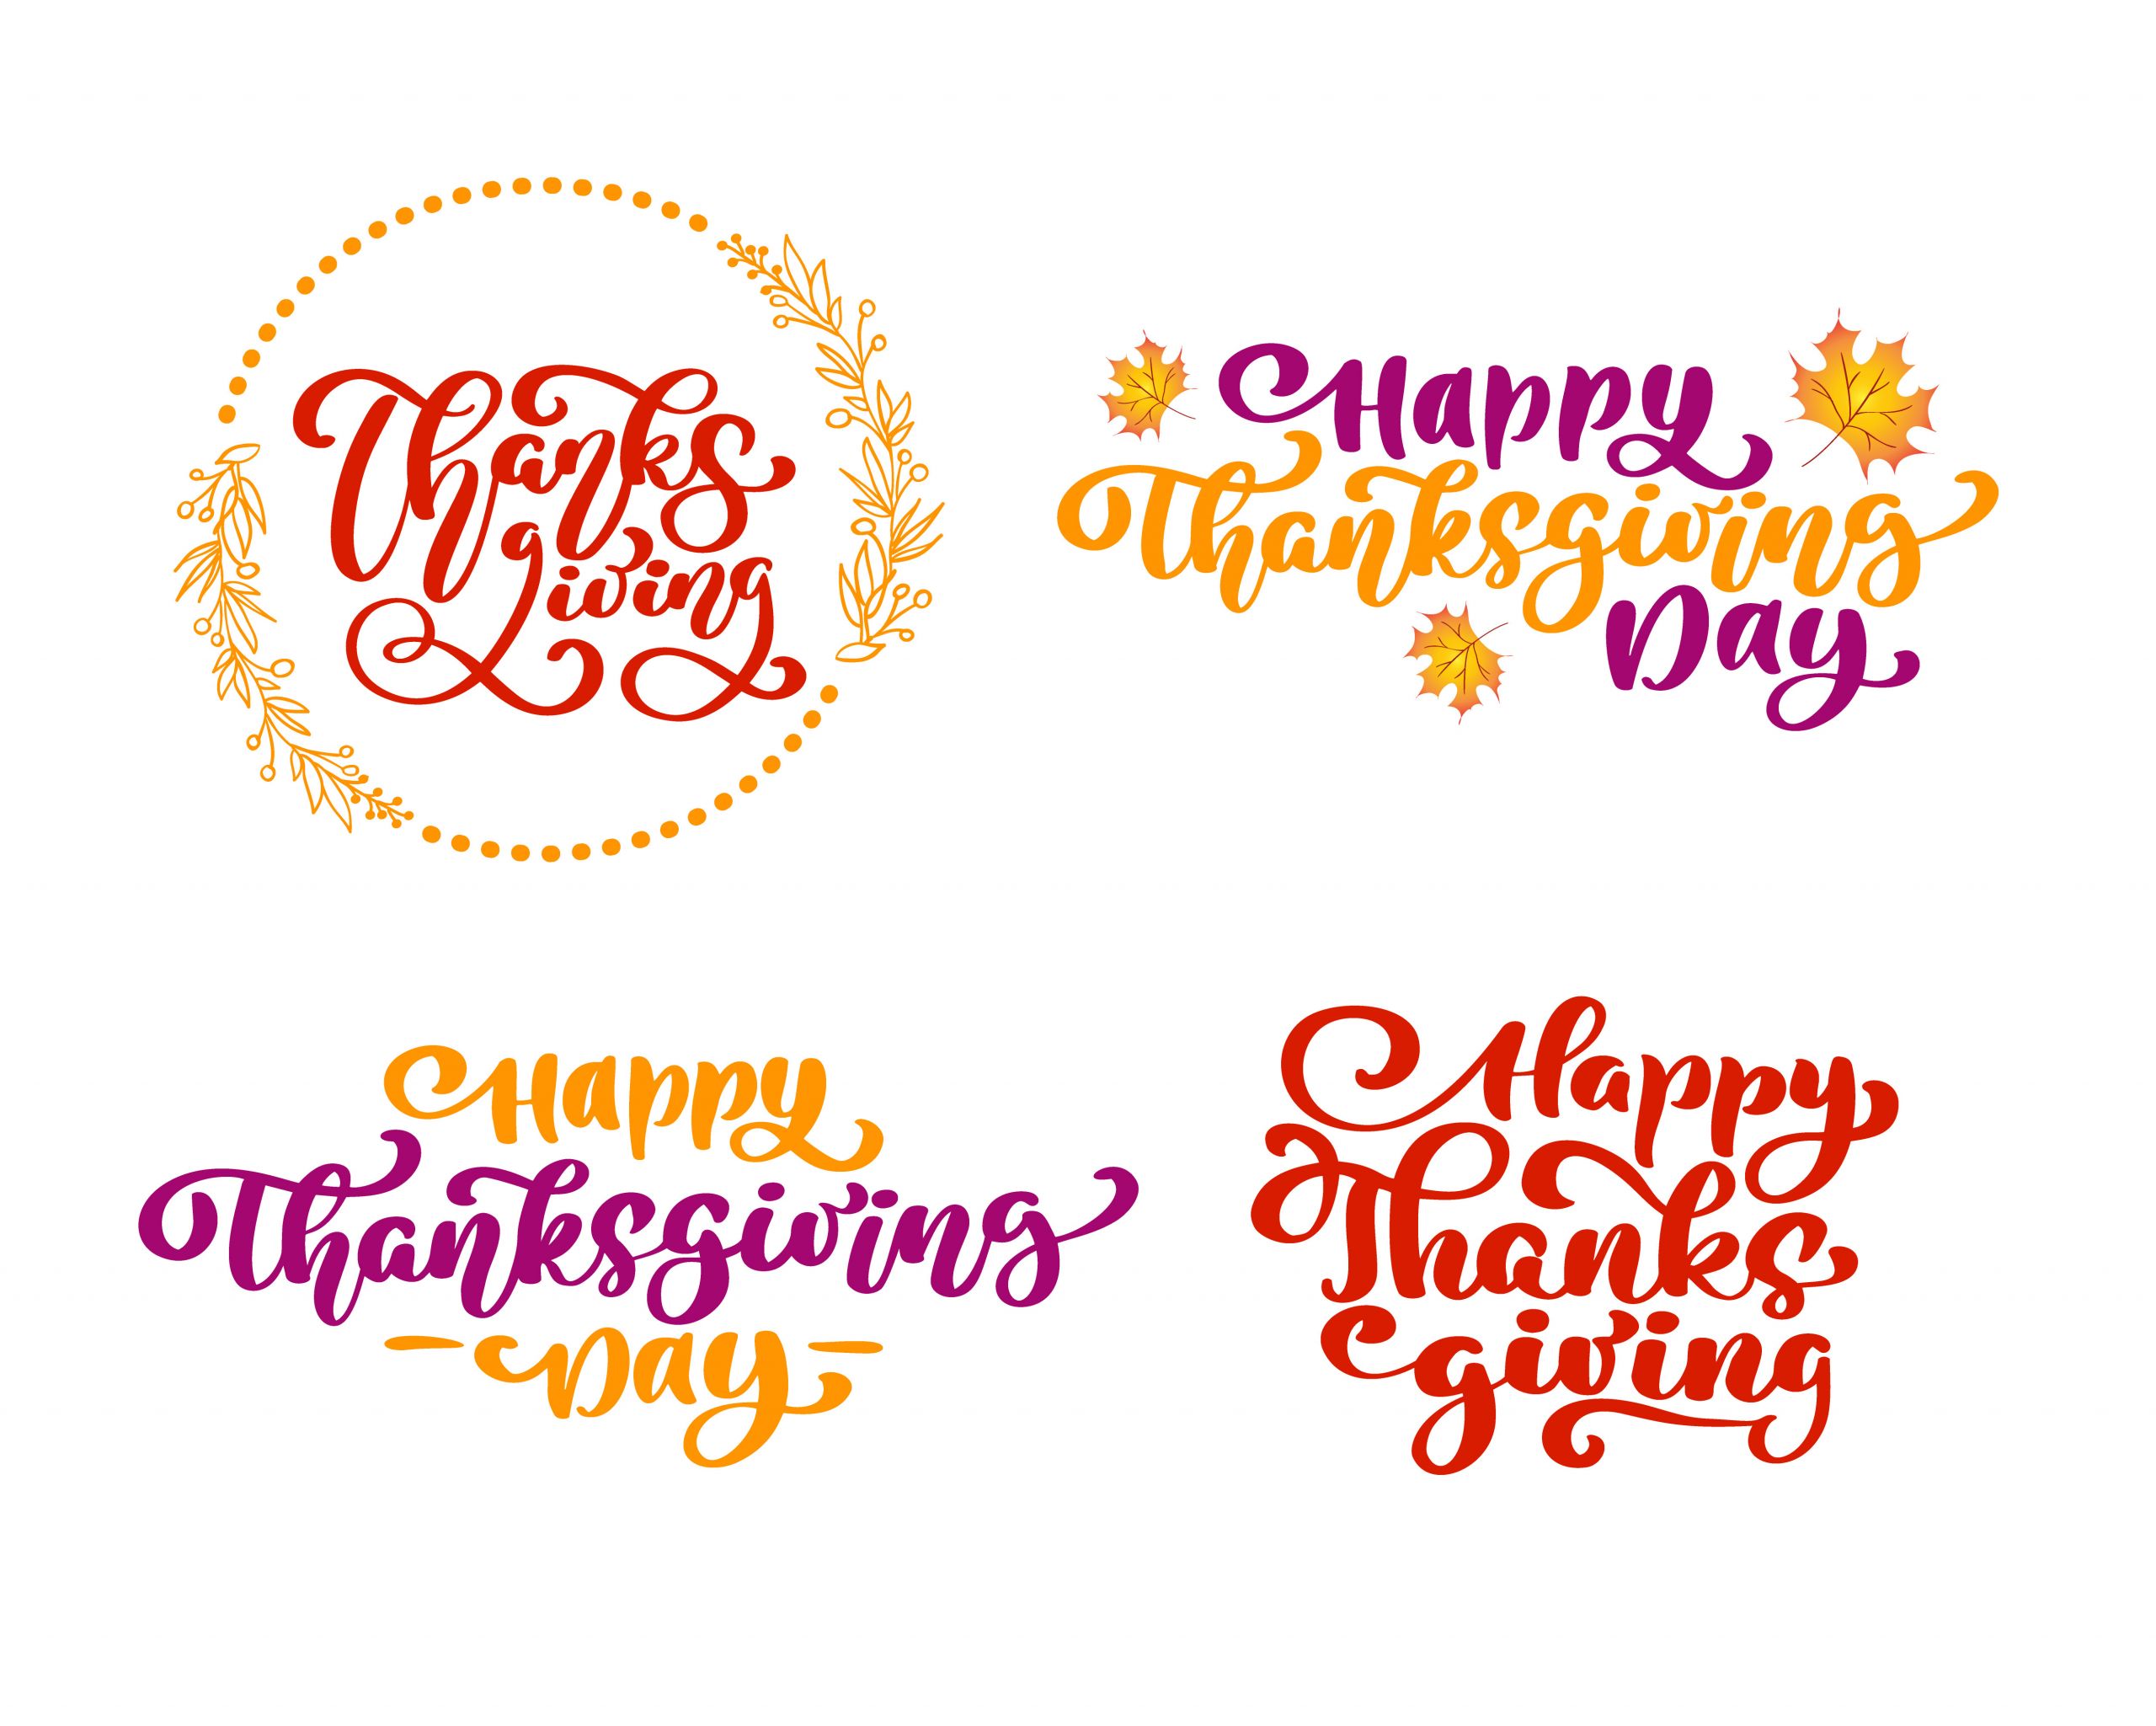 Thanksgiving Quotes Calligraphy
 Set of calligraphy phrases Thanksgiving Happy